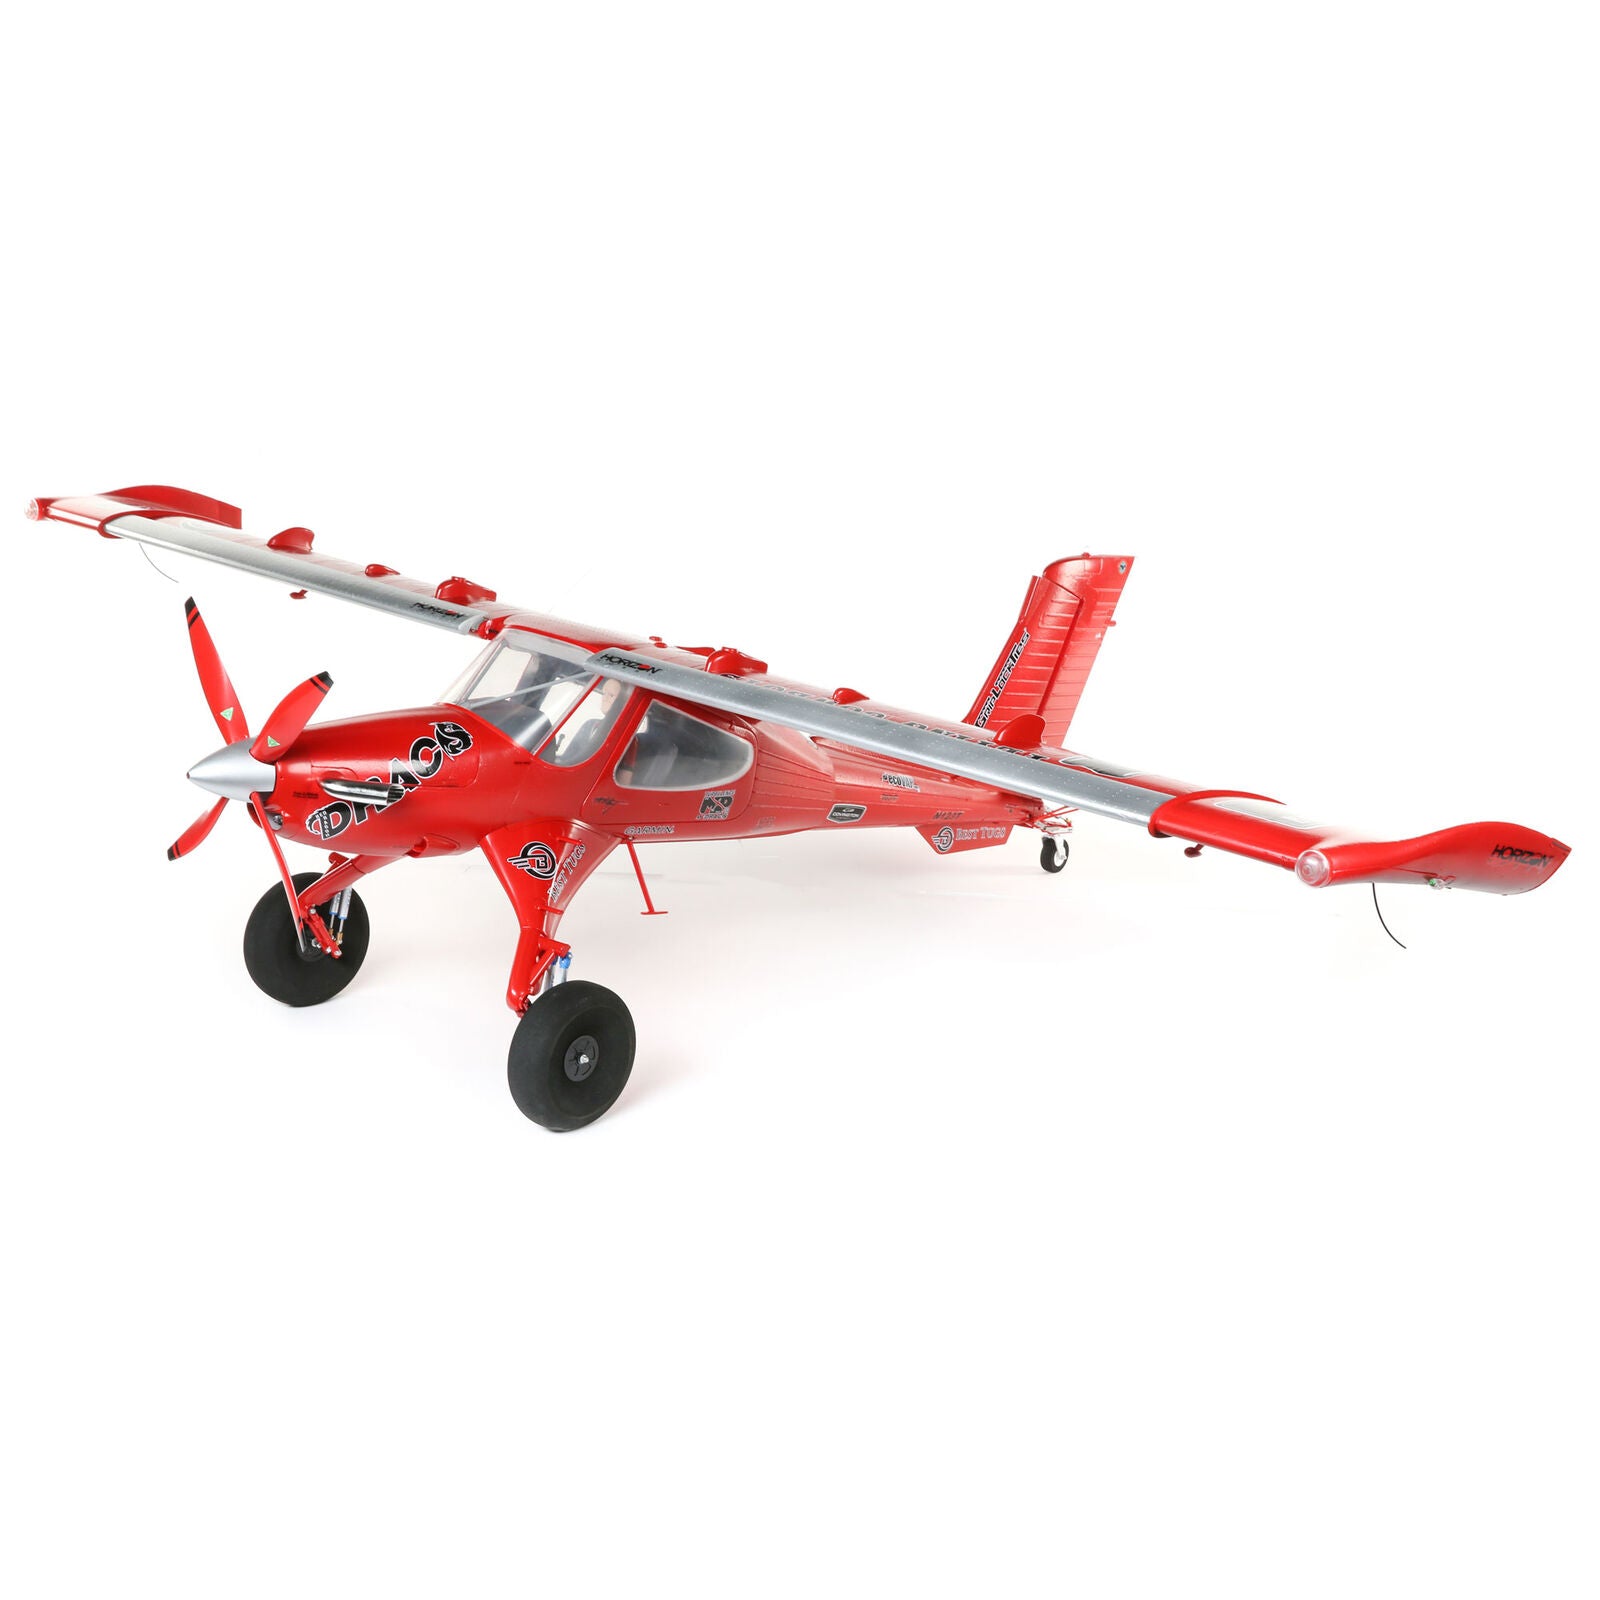 EFLITE EFL12550 DRACO 2.0m Smart BNF Basic with AS3X and SAFE Select